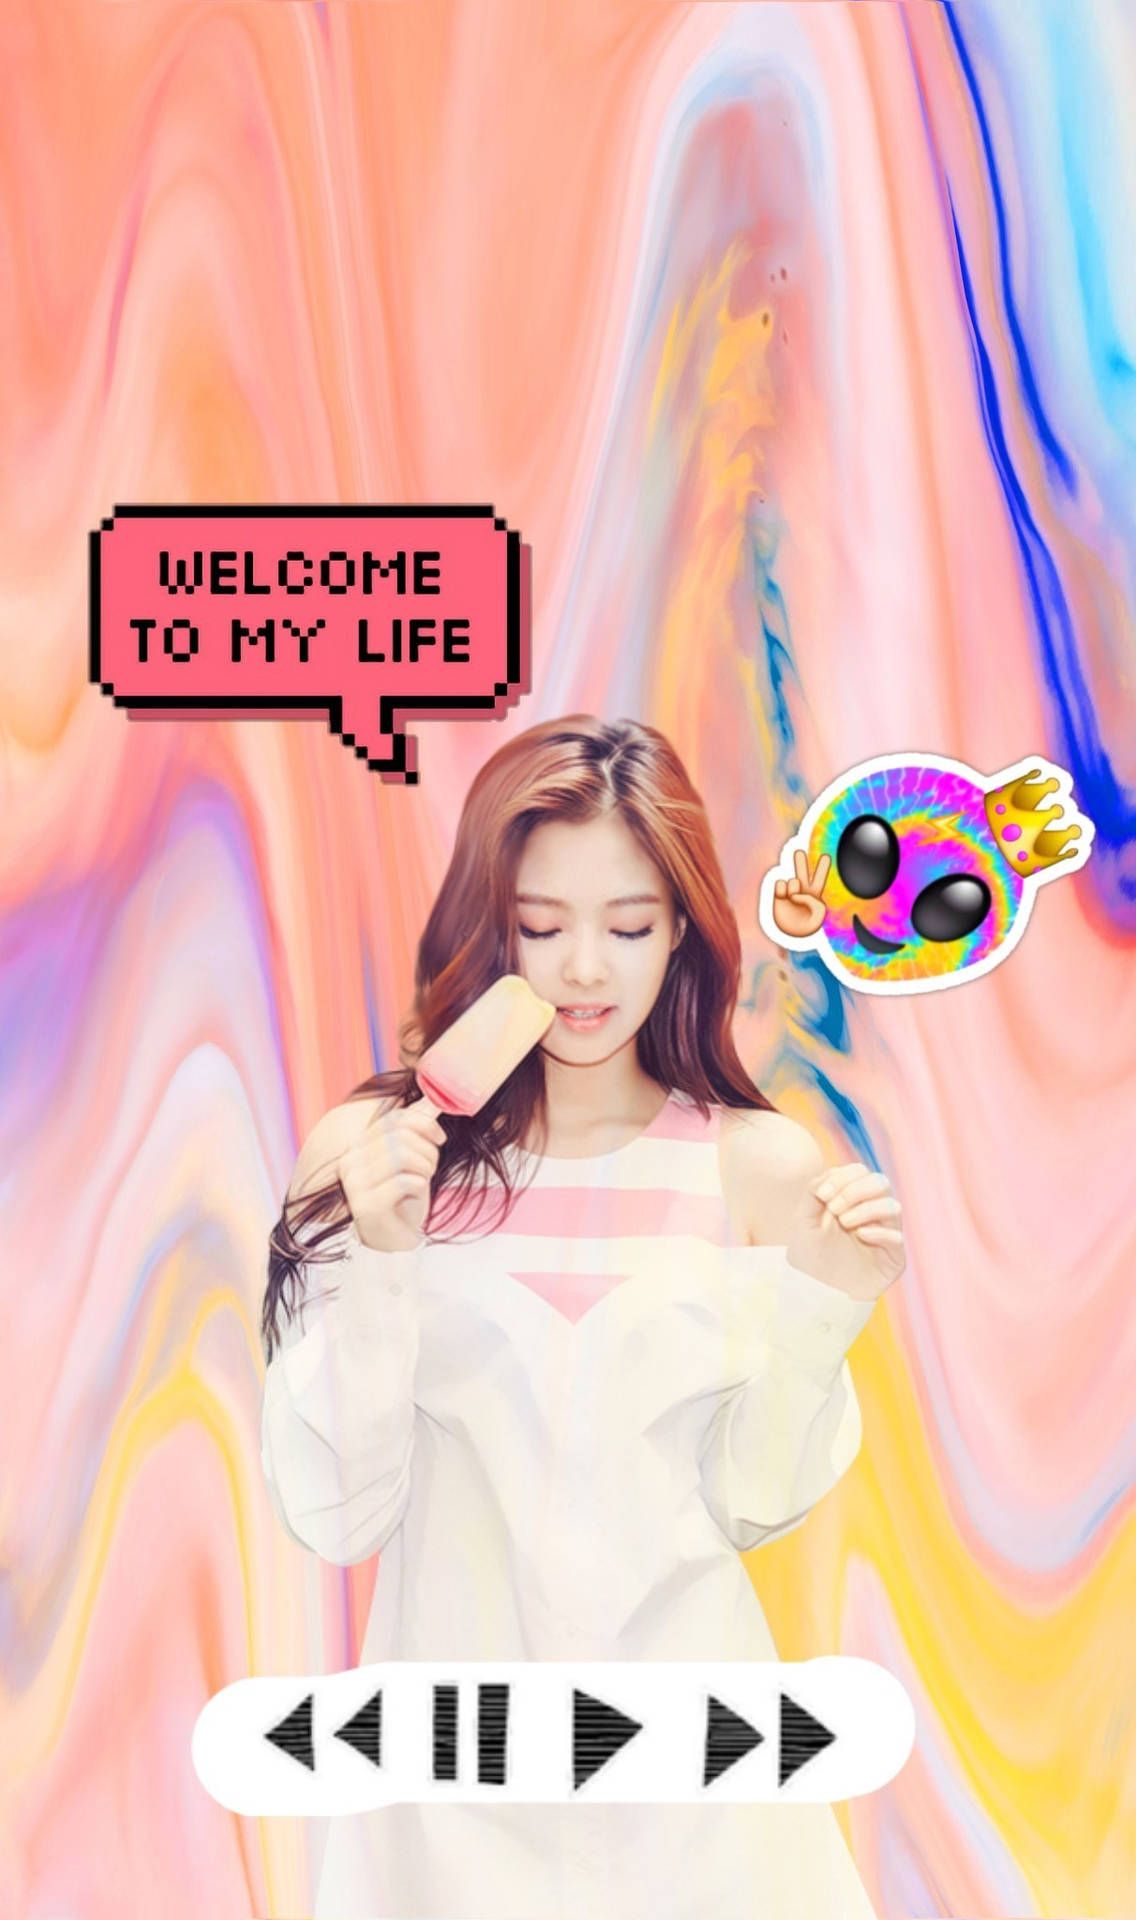 Welcome to my life, wallpaper with colorful background - Jennie